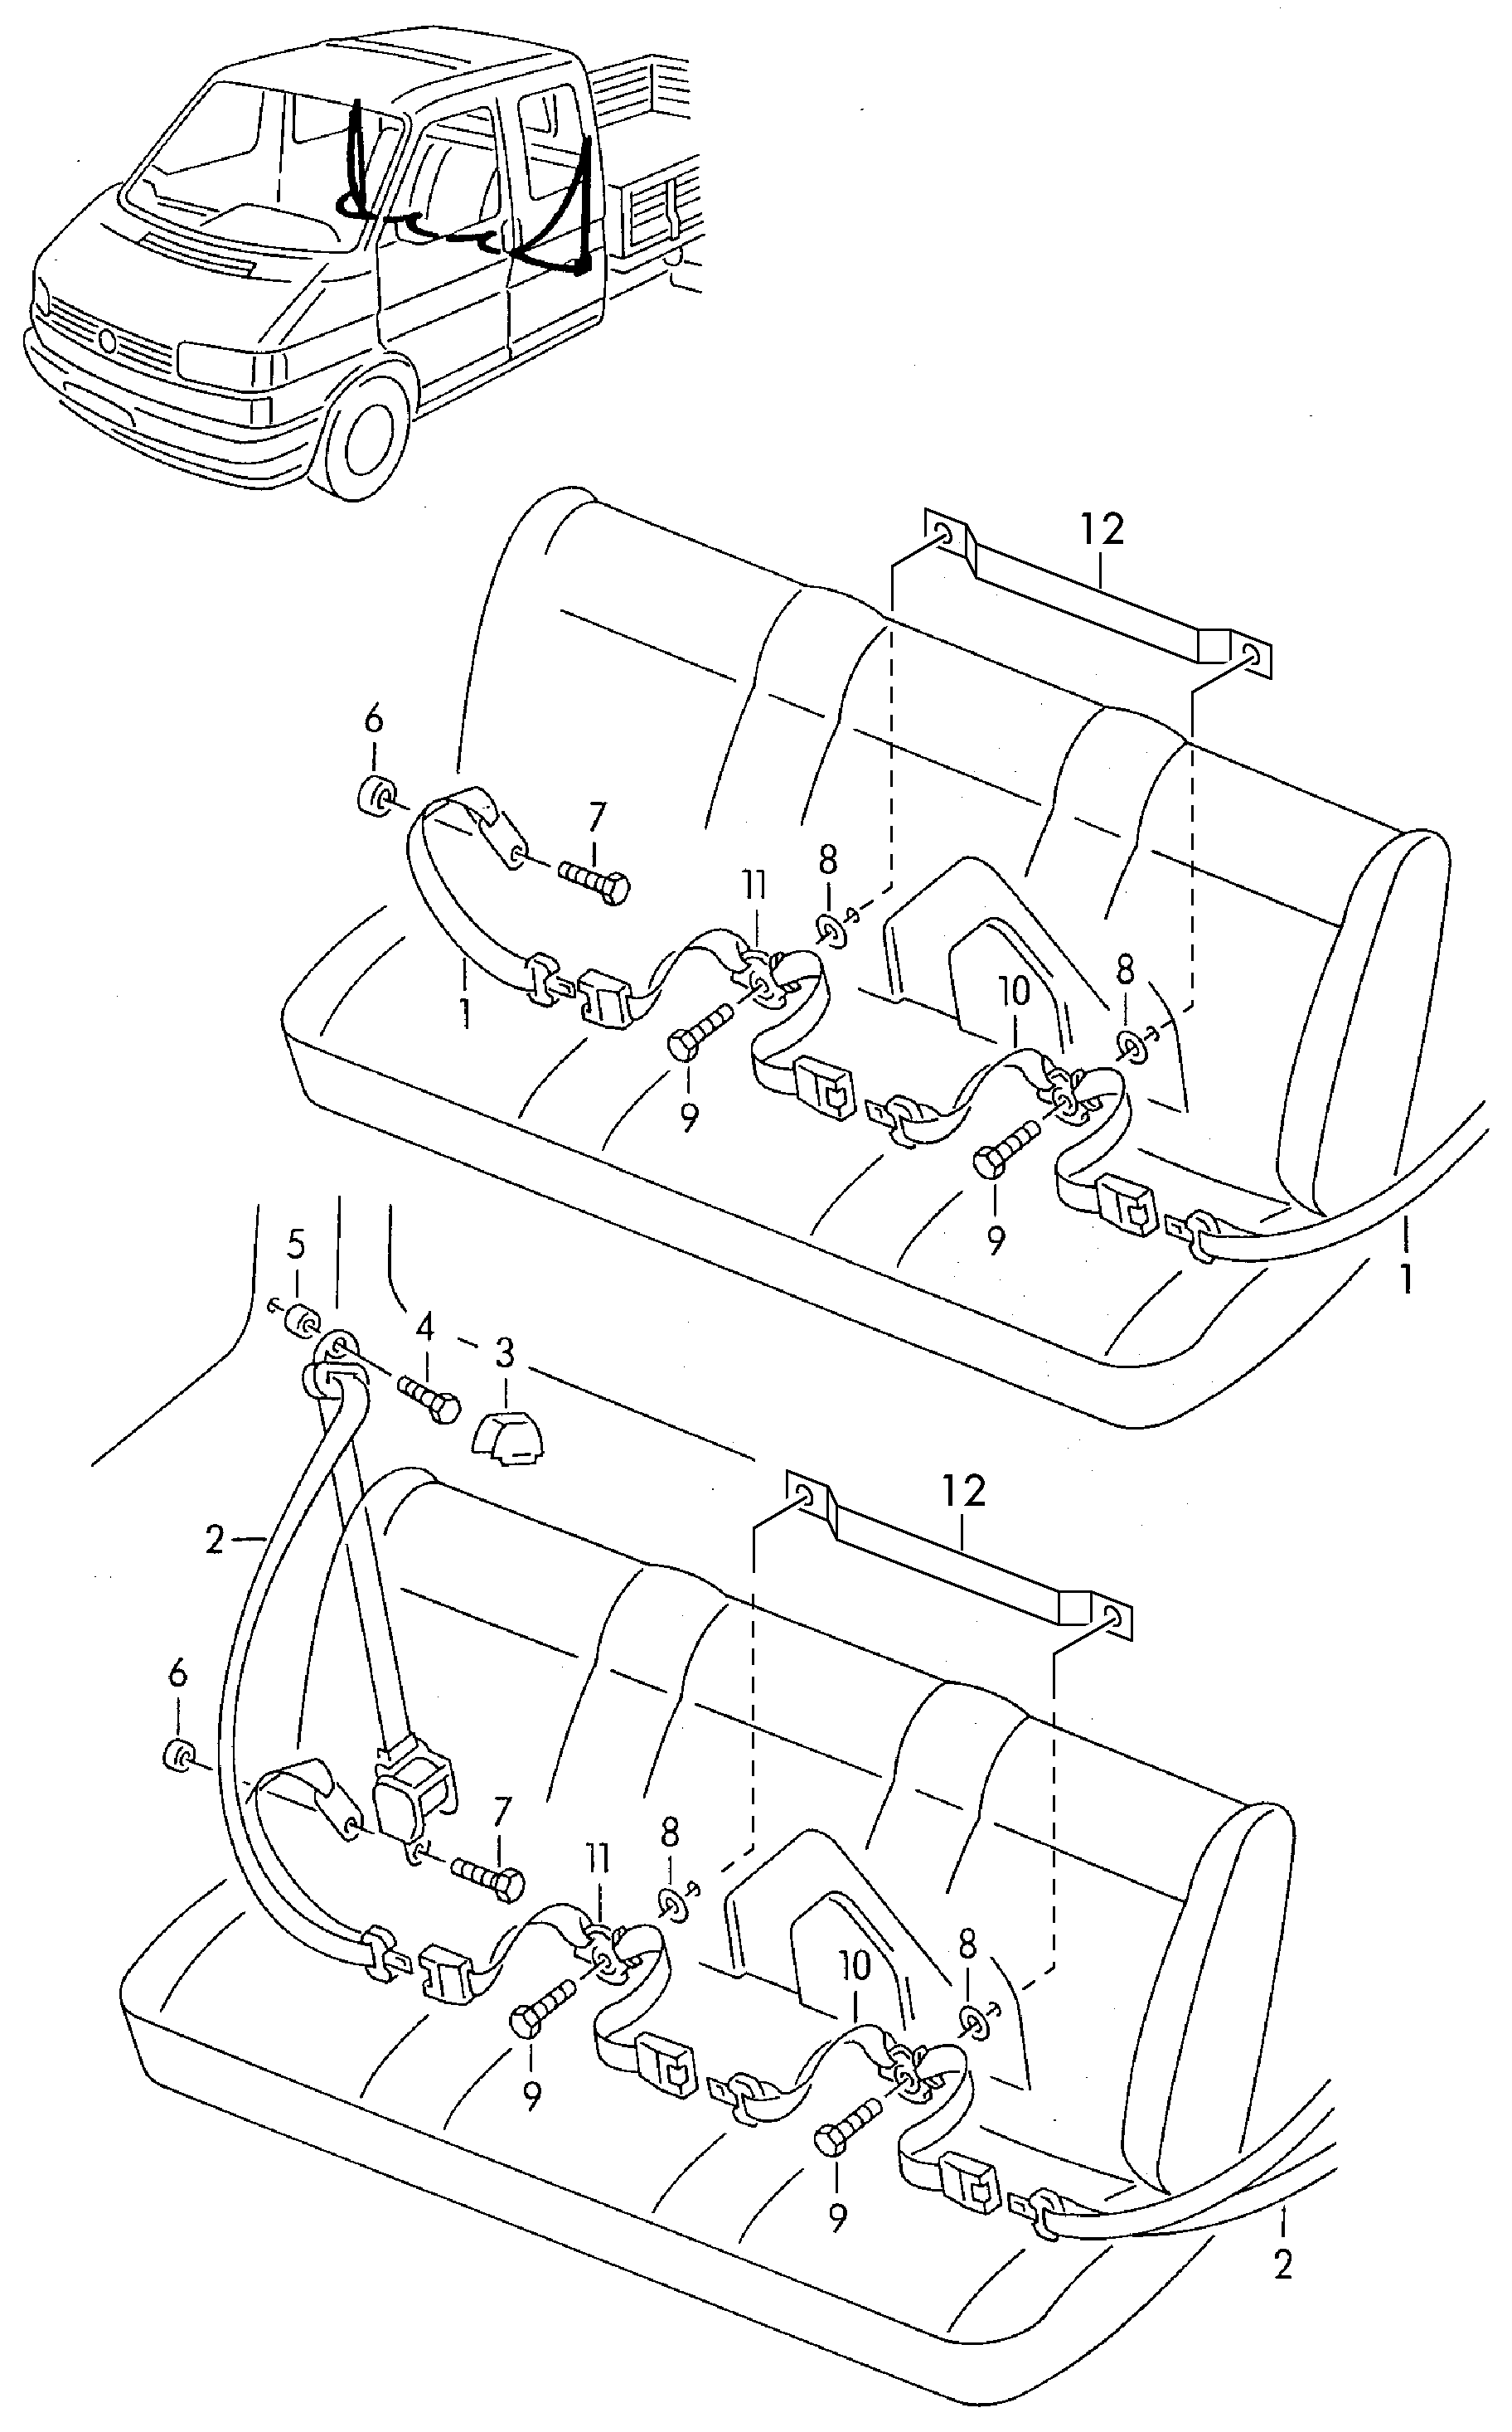 Seat belts in<br>passenger compartment  - Transporter - tr